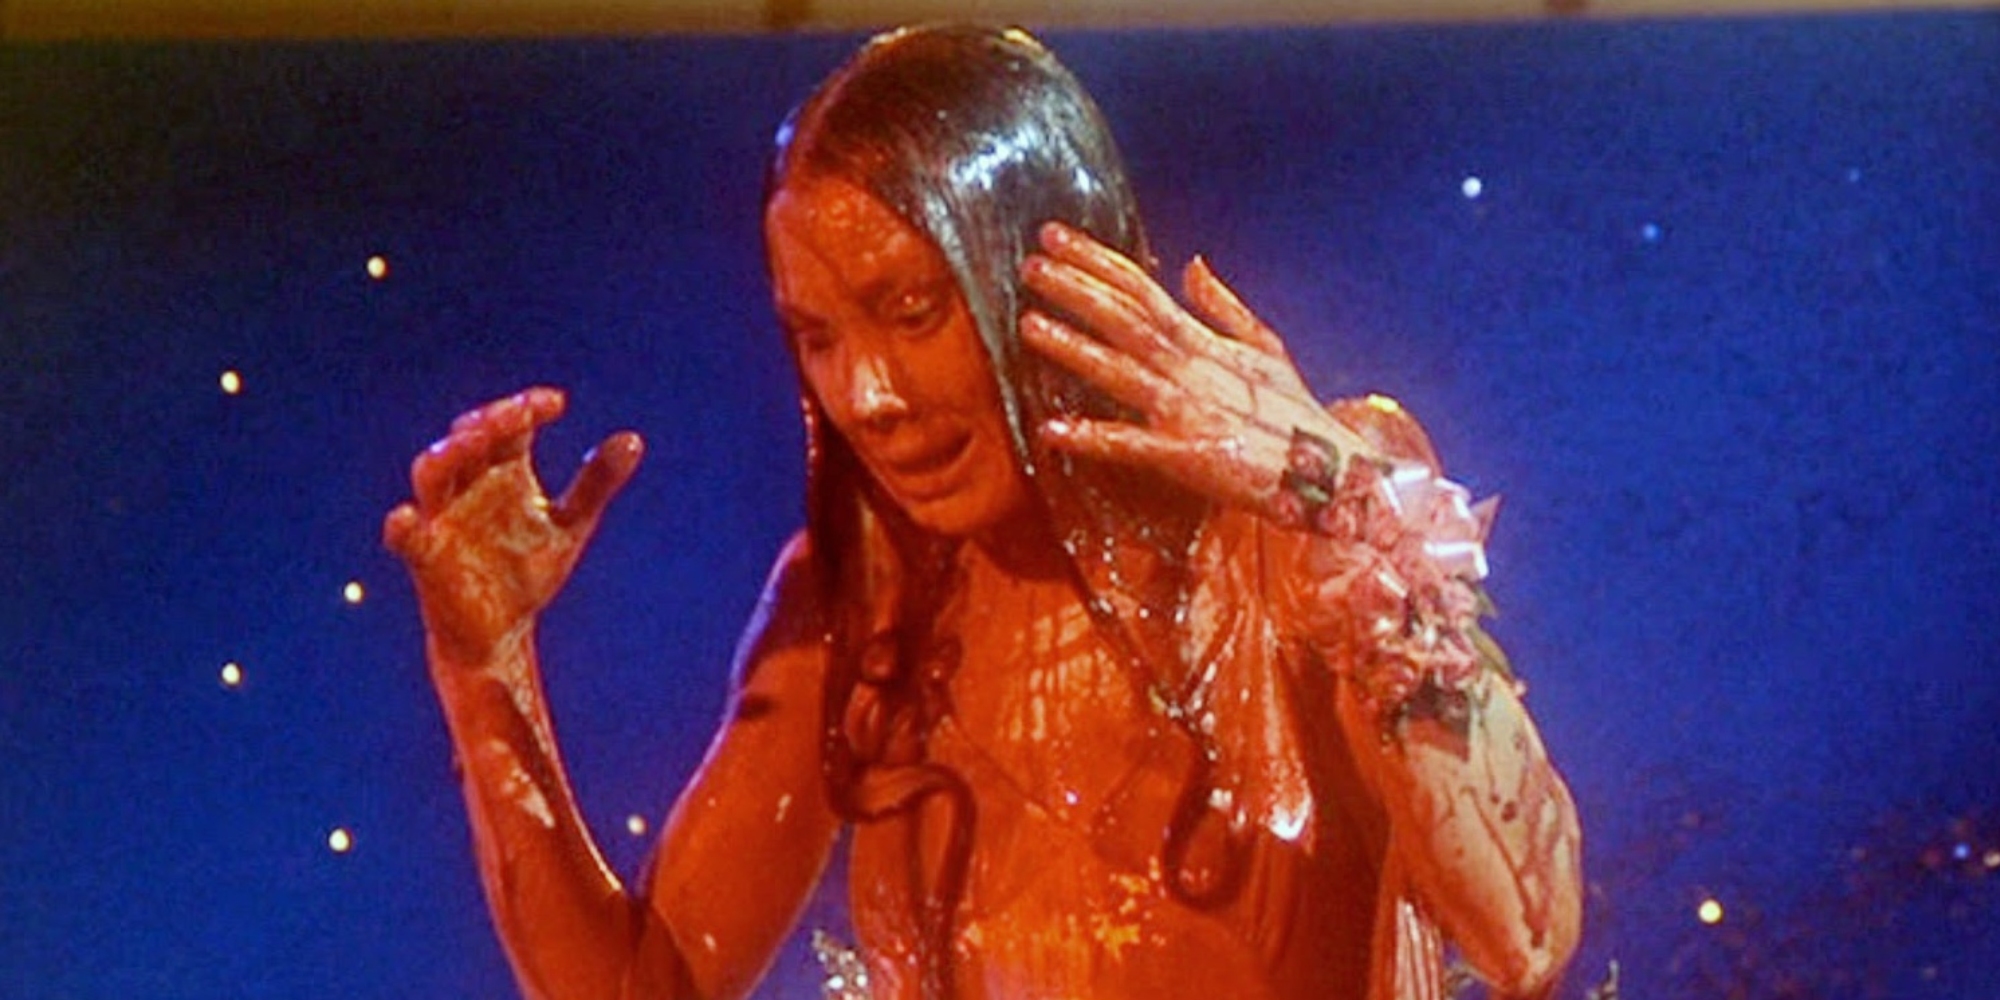 Carrie covered in blood on her prom night